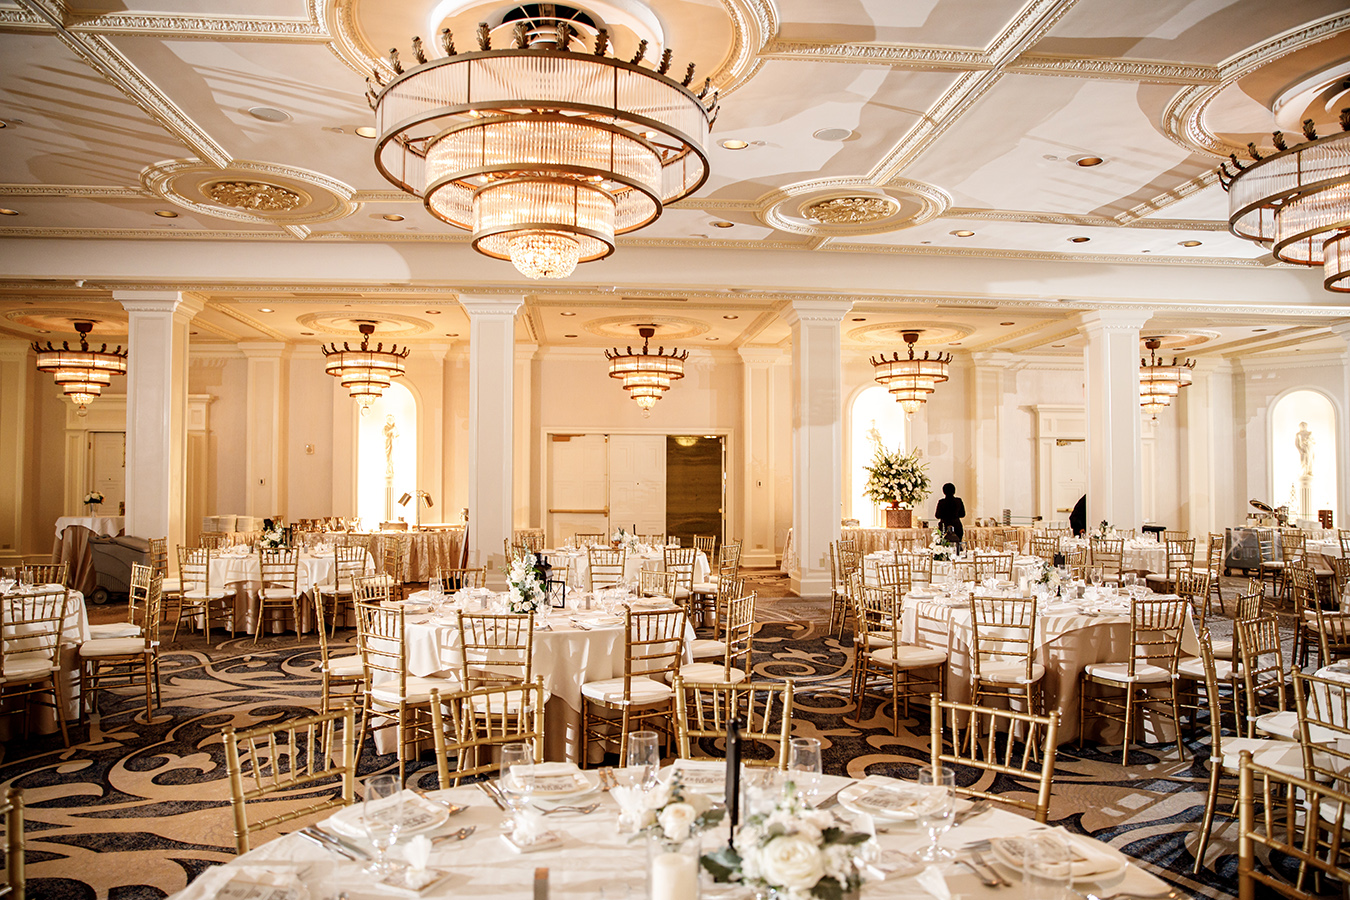 The couple chose the Waldorf Astoria Ballroom at the Roosevelt Hotel for their wedding reception.